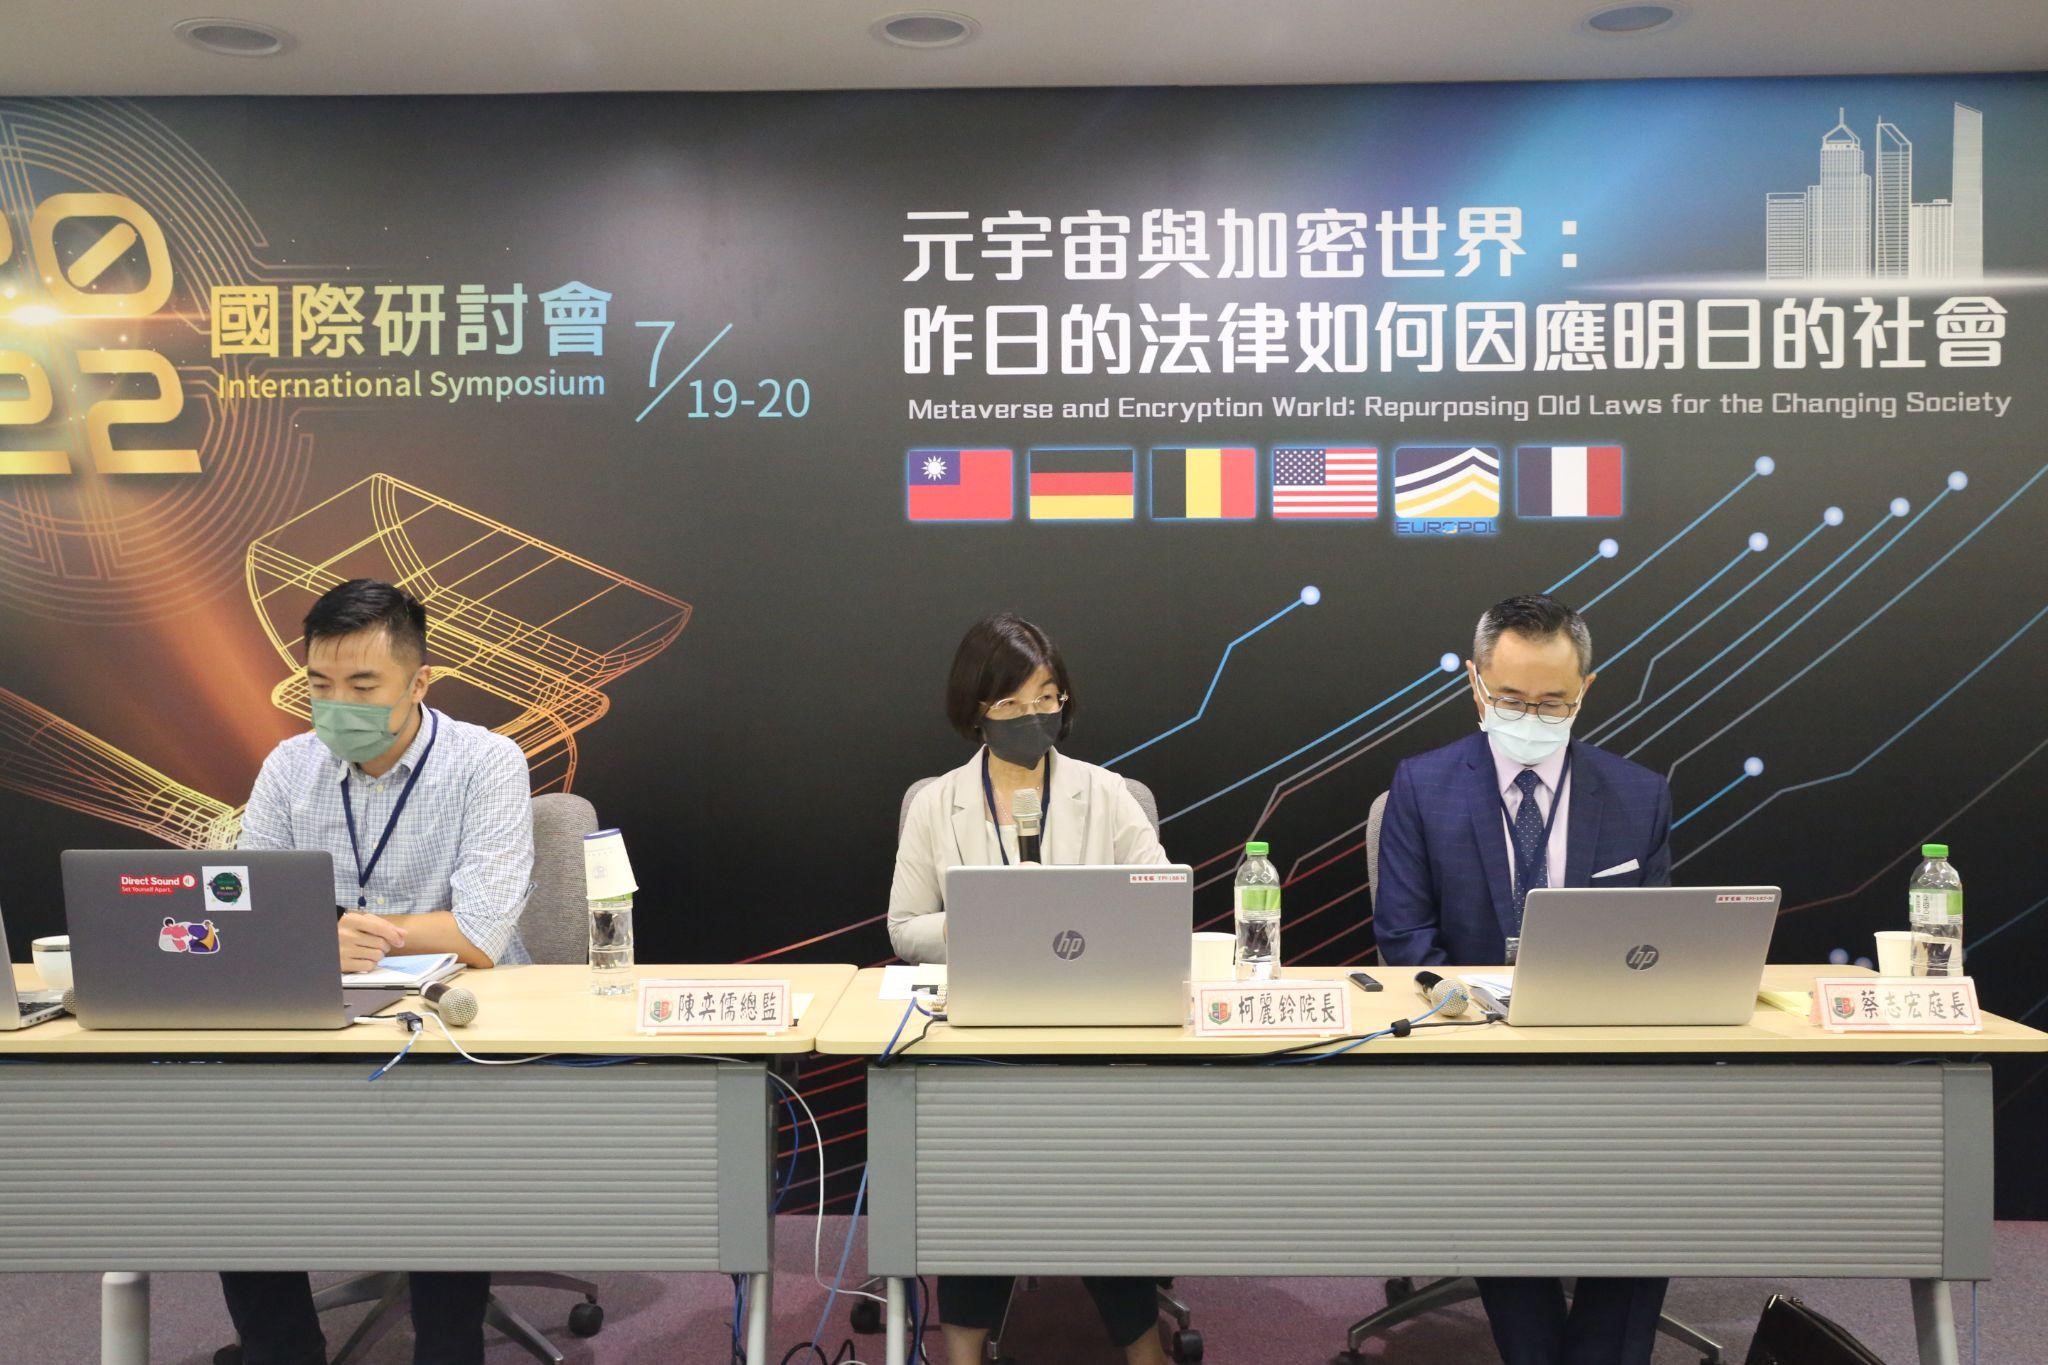 The 2022 International Symposium of the Academy for the Judiciary, MOJ on Metaverse and Encryption World  Repurposing Old Laws for the Changing Society  came to a successful conclusion